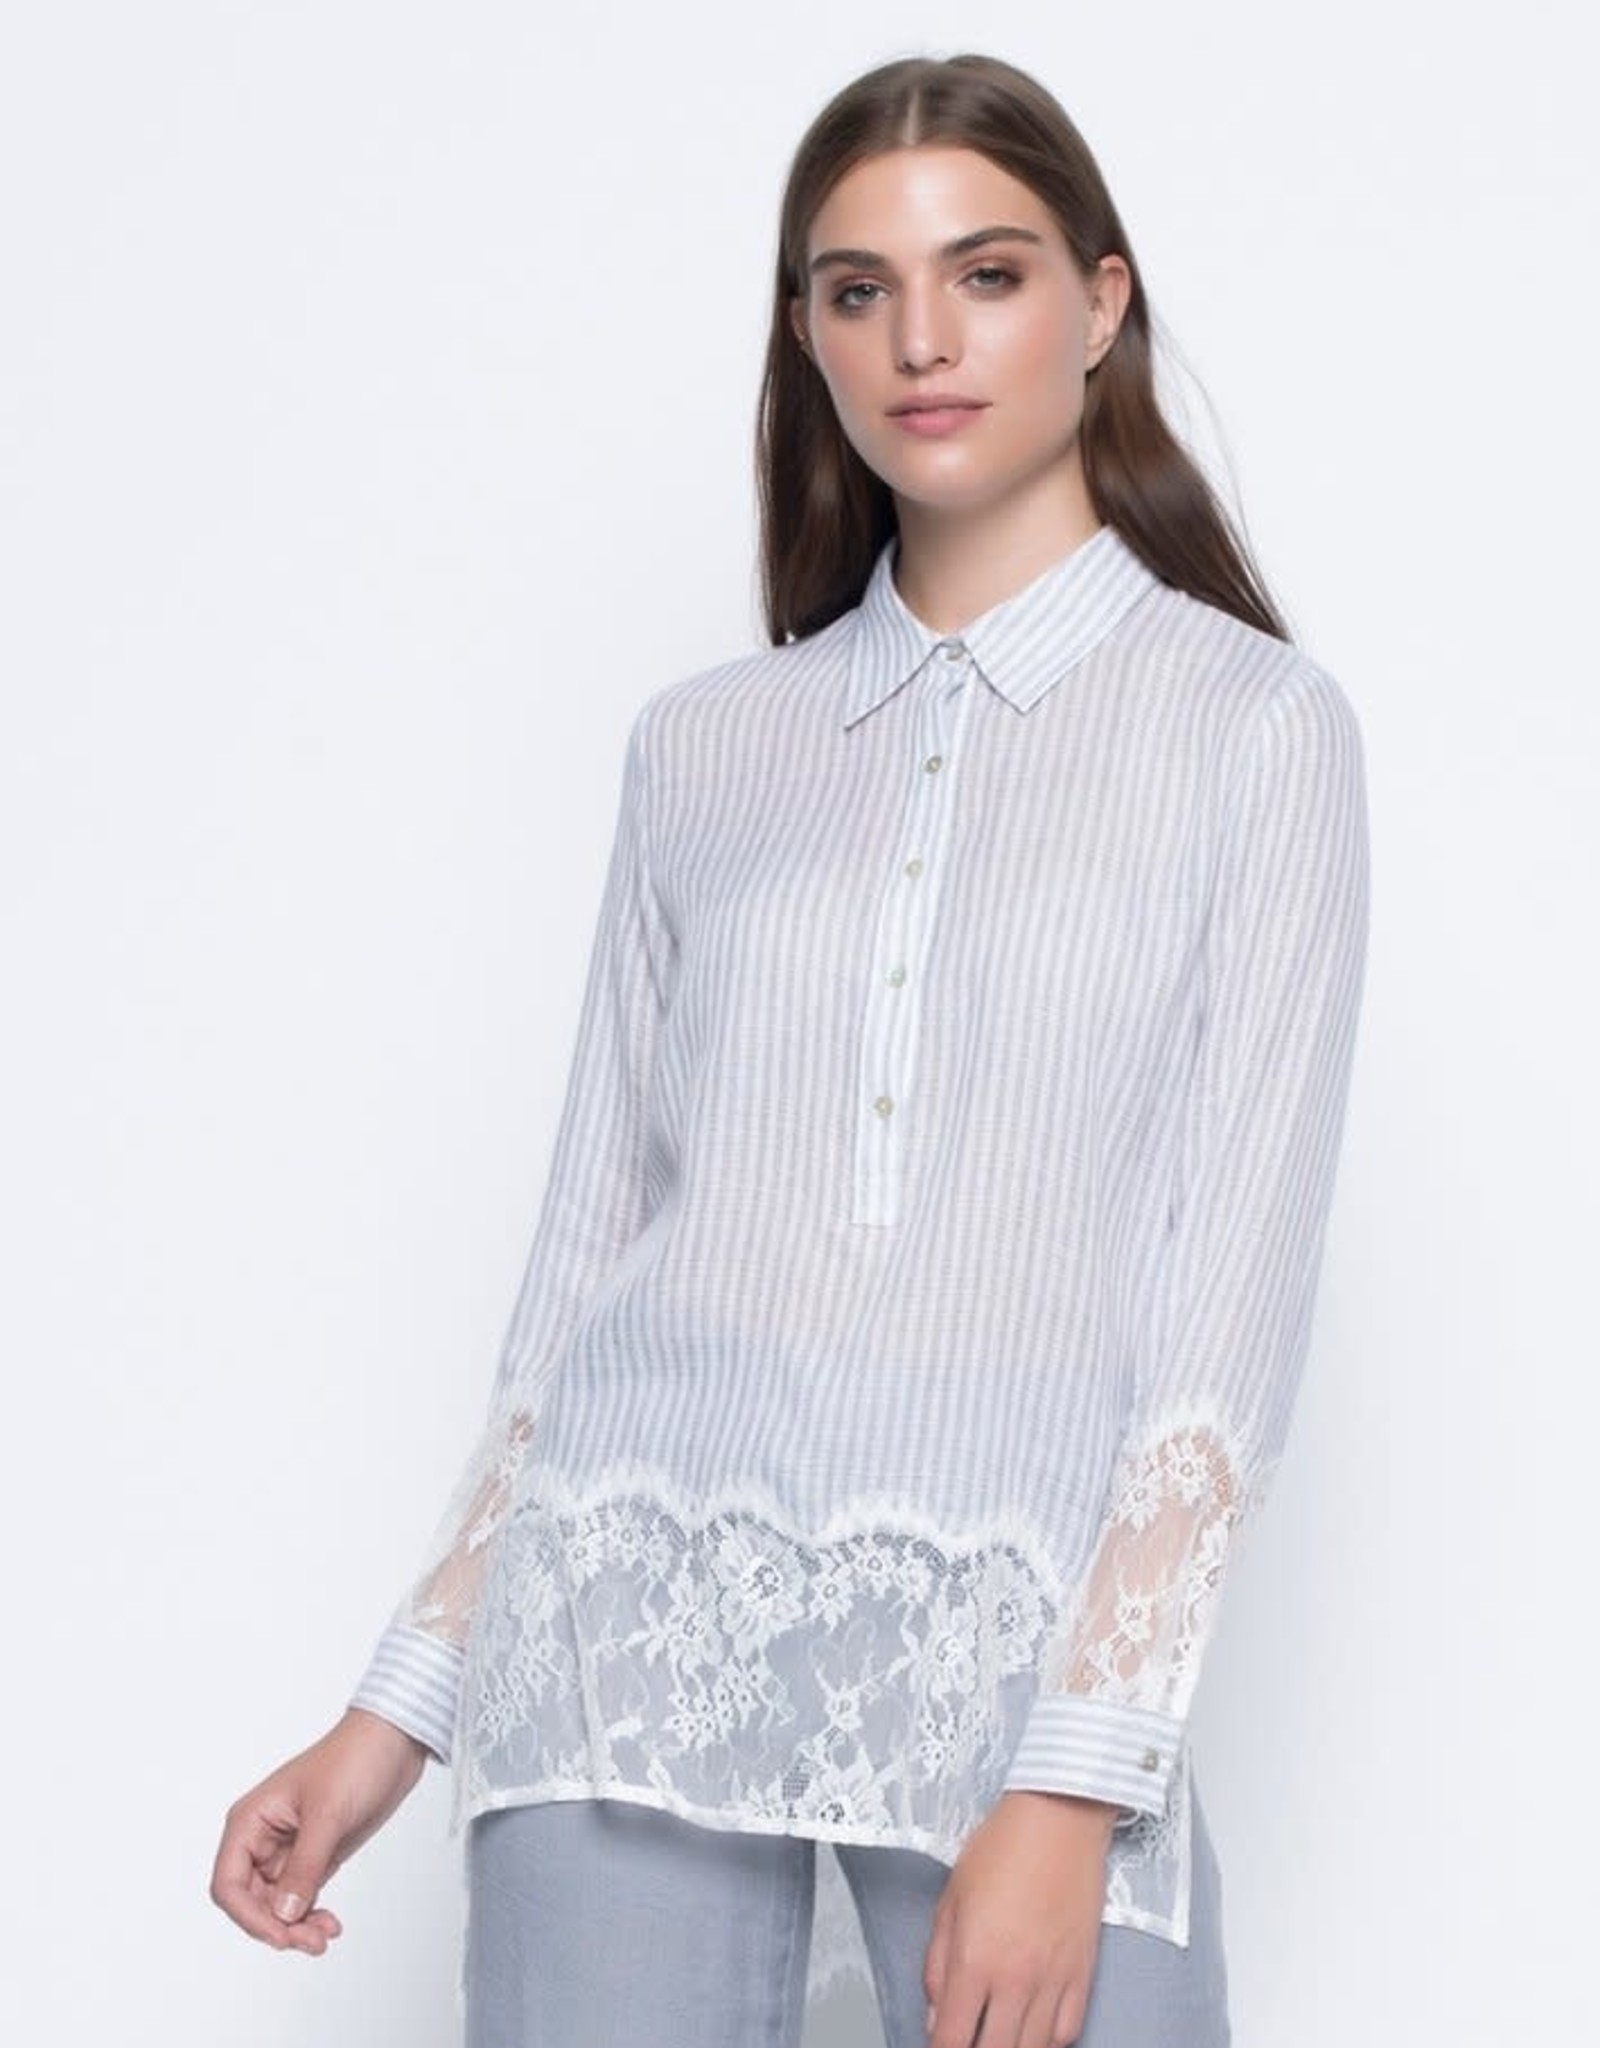 Lace Trimmed Placket Tunic